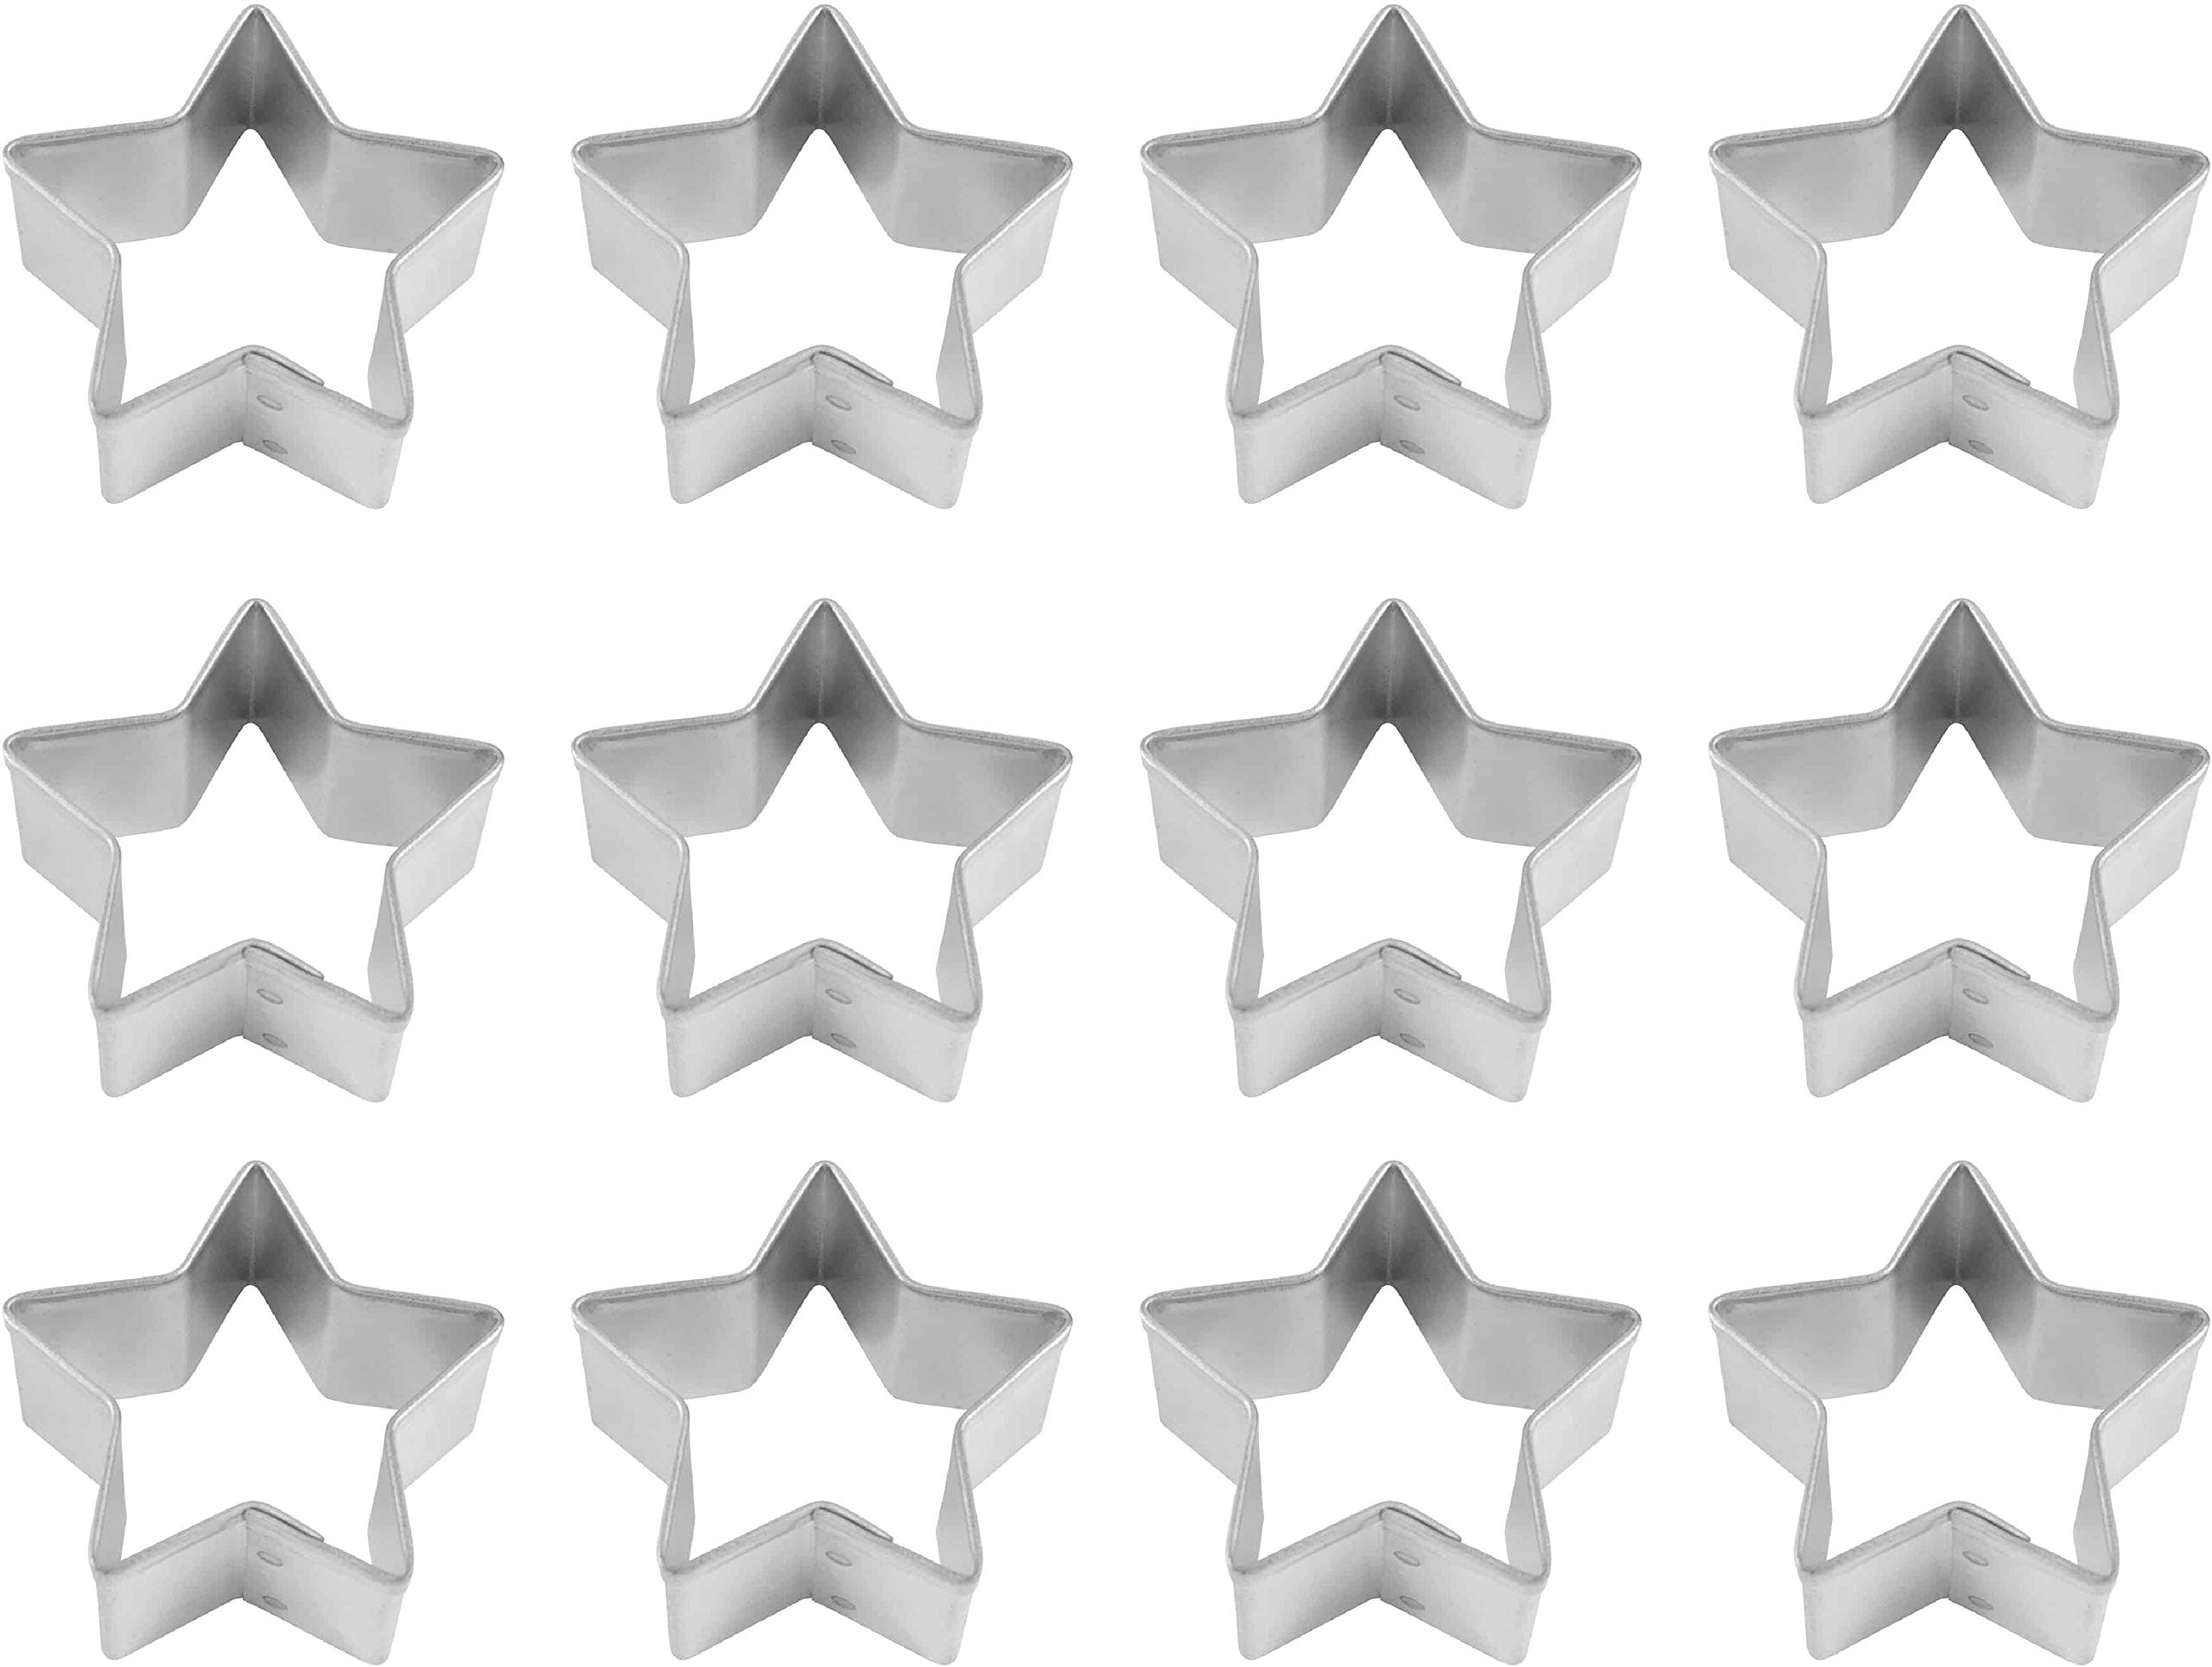 1 Dozen/12 Count Mini Stars 1.5 Inch Cookie Cutters from The Cookie Cutter Shop – Tin Plated Steel Cookie Cutters